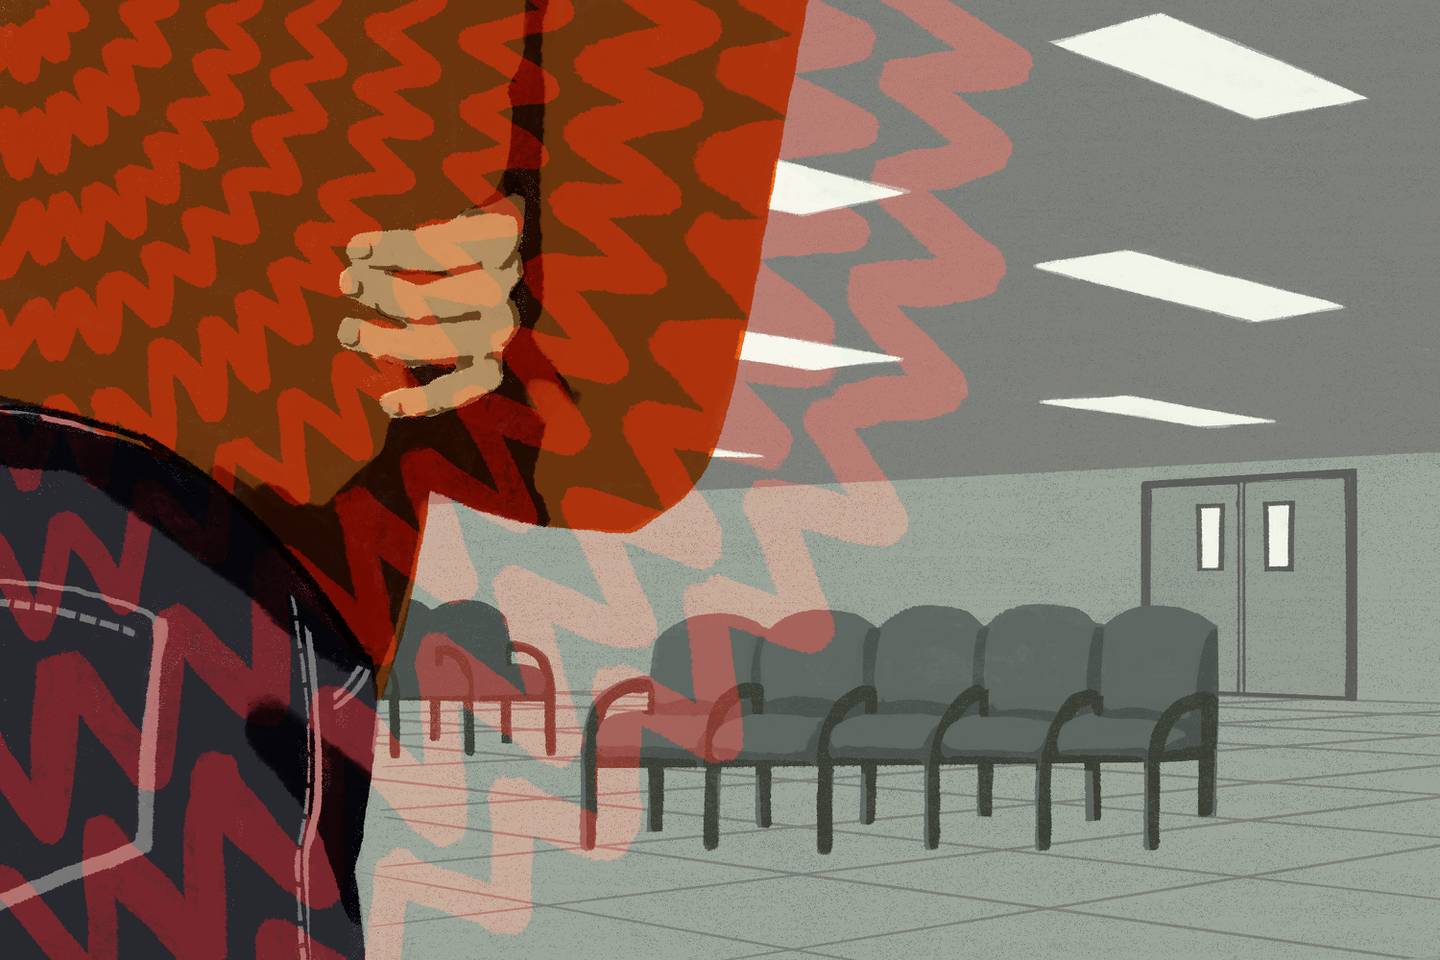 Illustration showing woman in extreme foreground, bending at waist, clutching herself, with radiating jagged lines showing her pain. In background, waiting room chairs and double doors to emergency room.